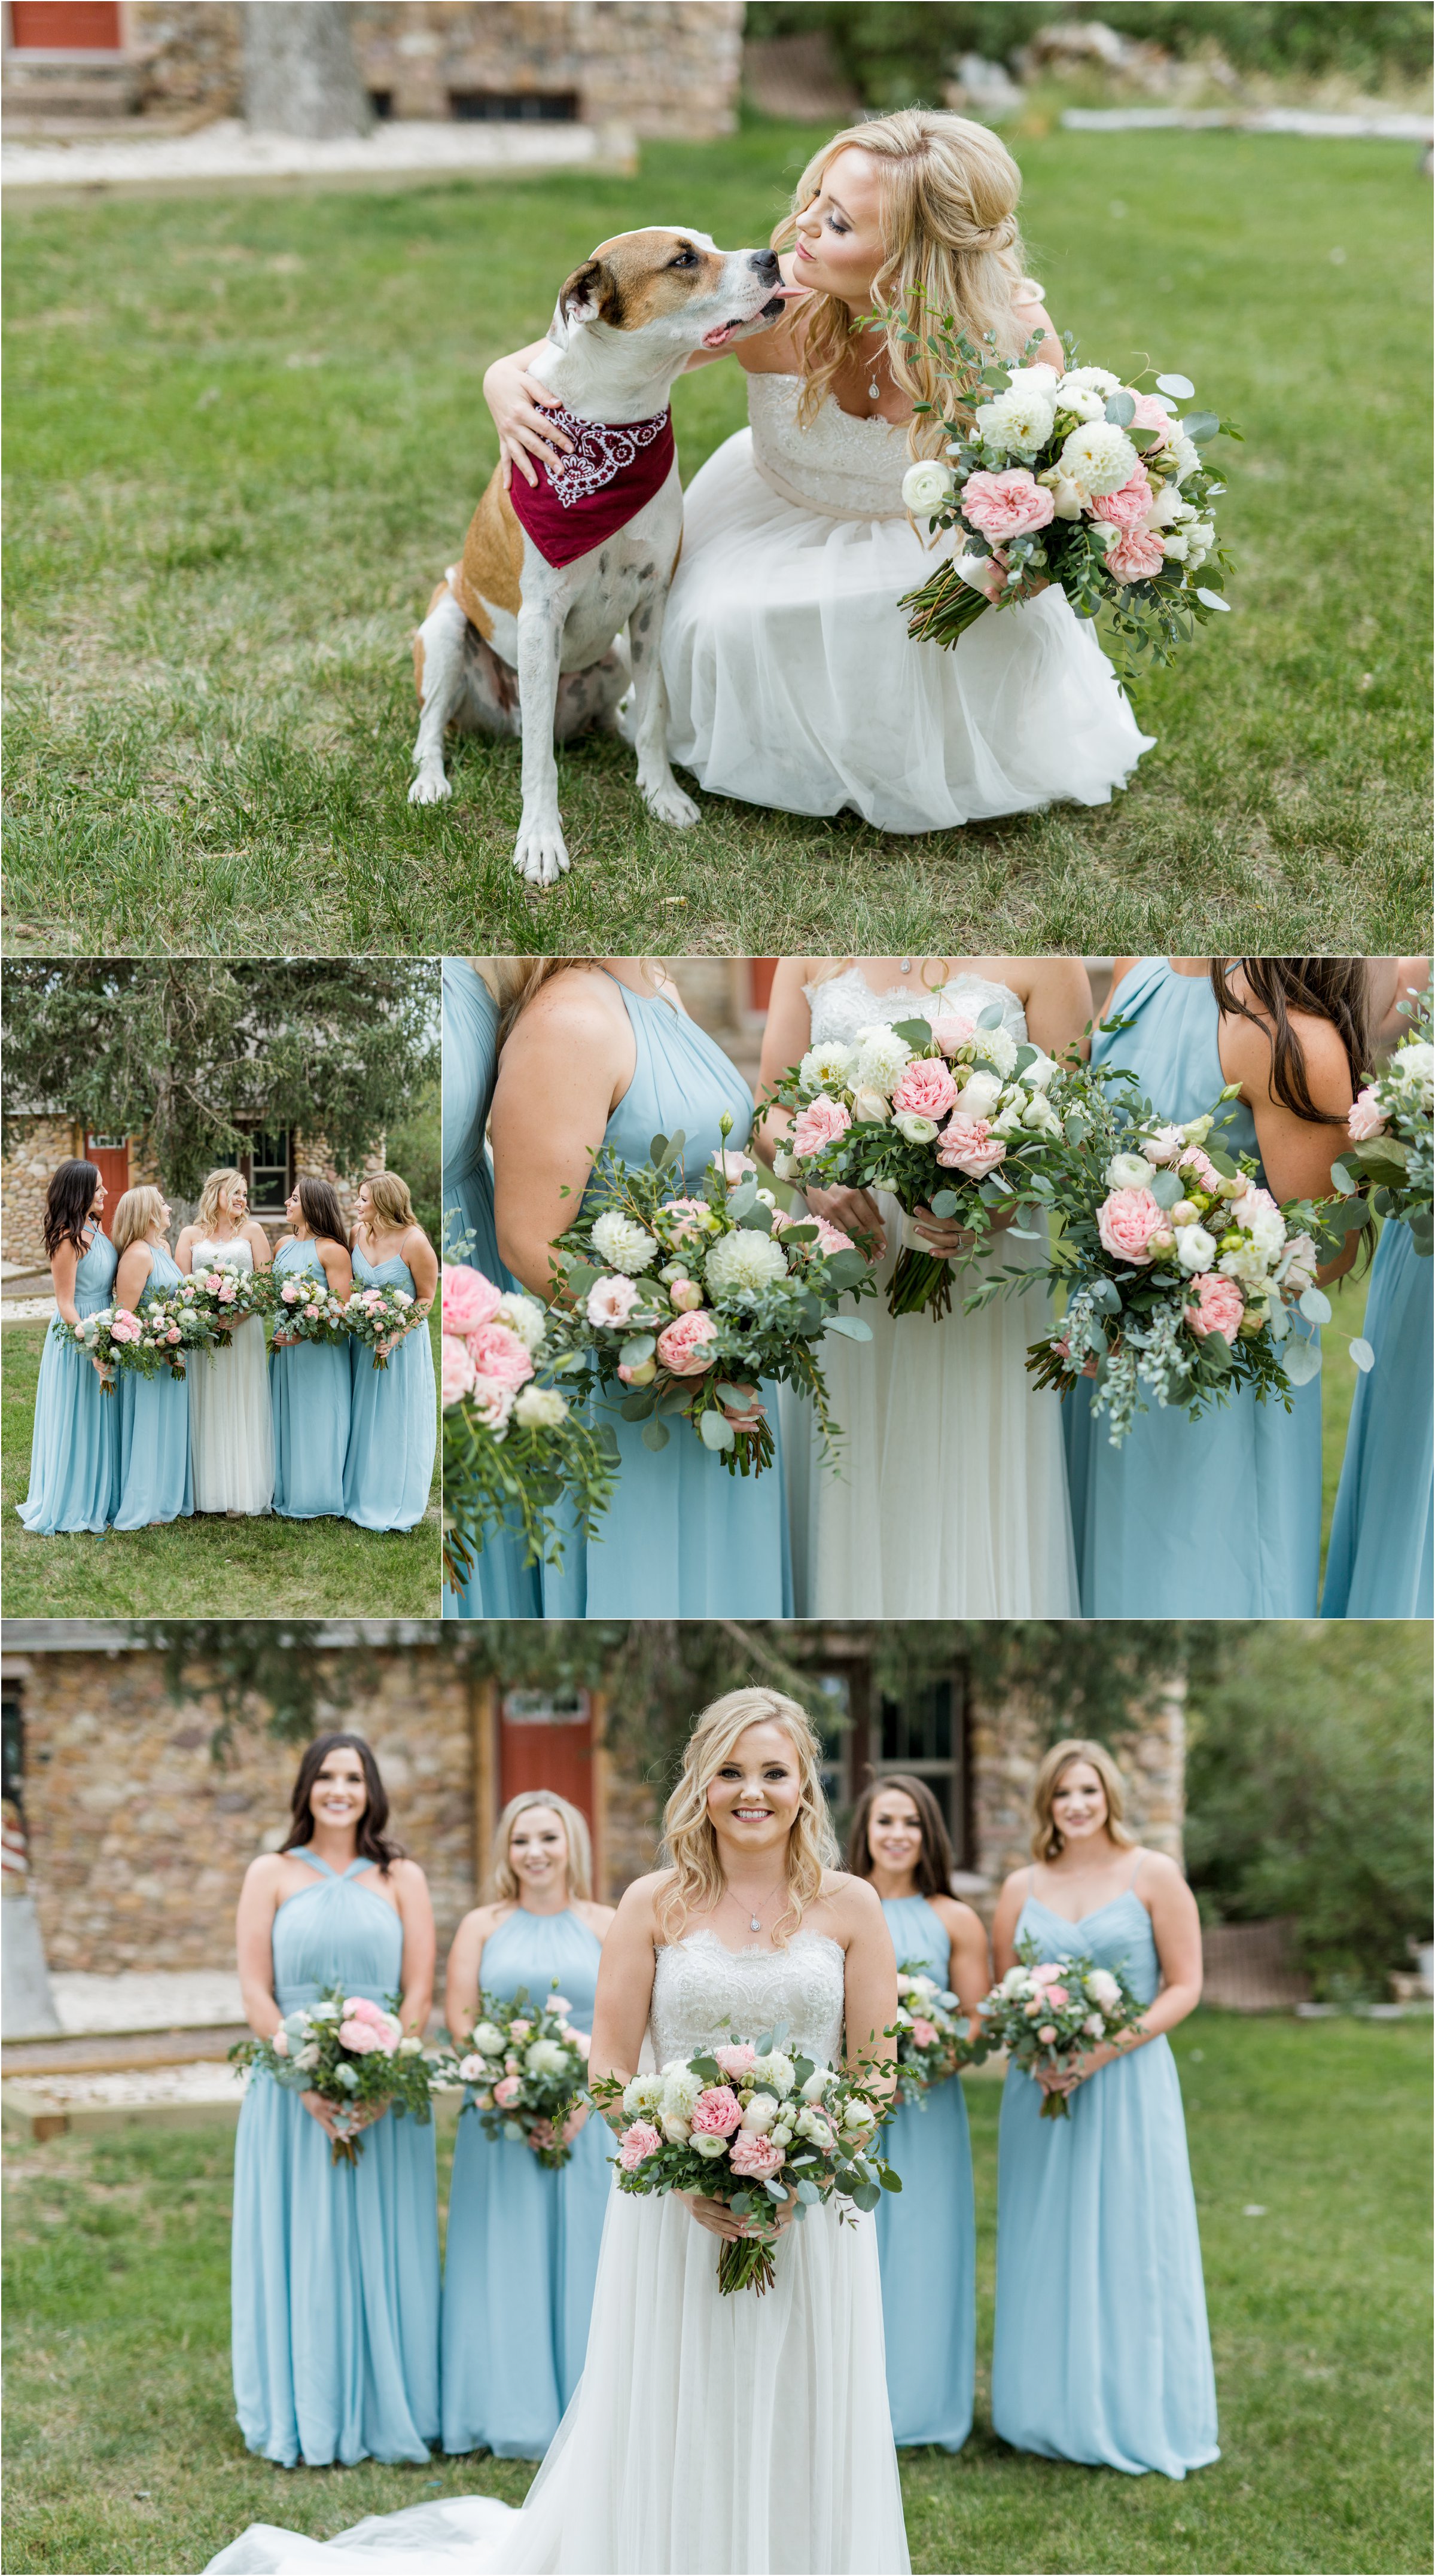 the bride and her dog along with the bride and bridesmaids with their large bouquets